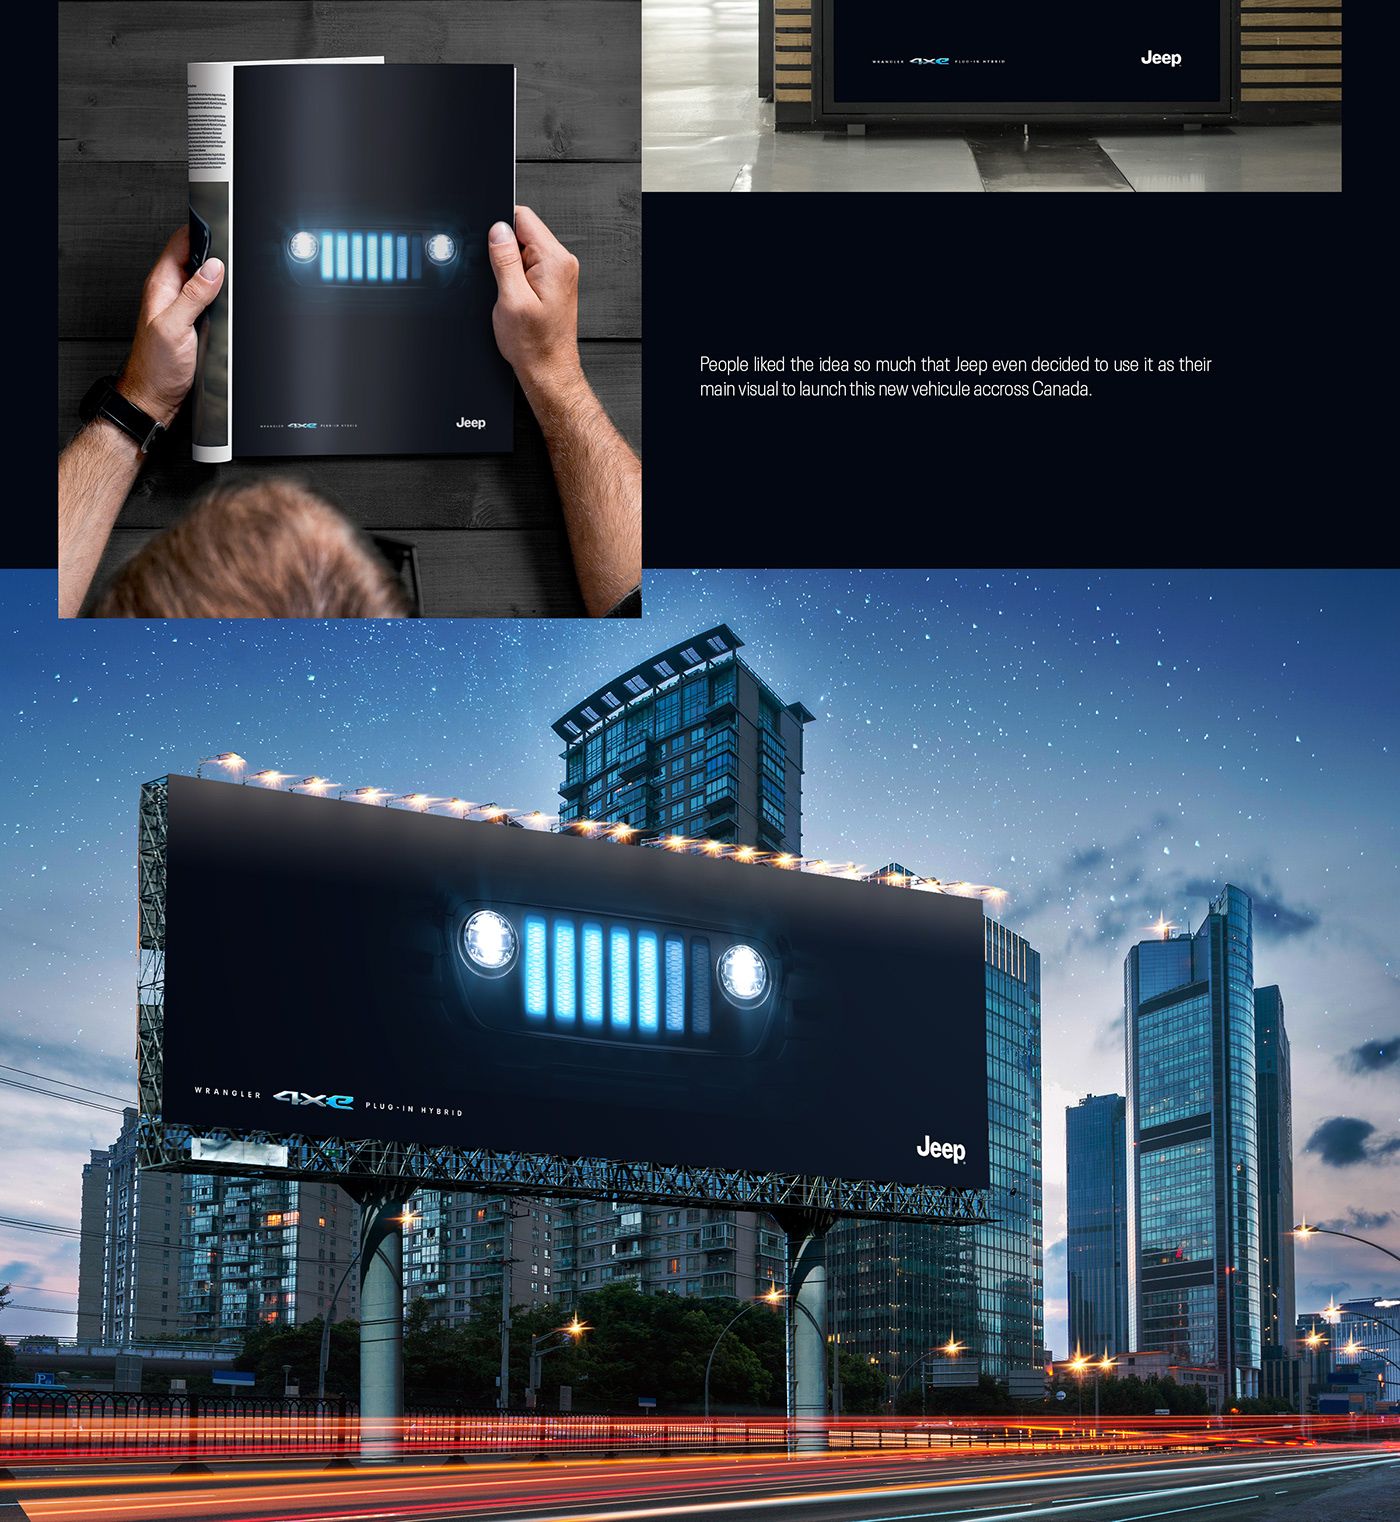 Advertising  automotive   billboard car charging electric electricity jeep stunt Wrangler